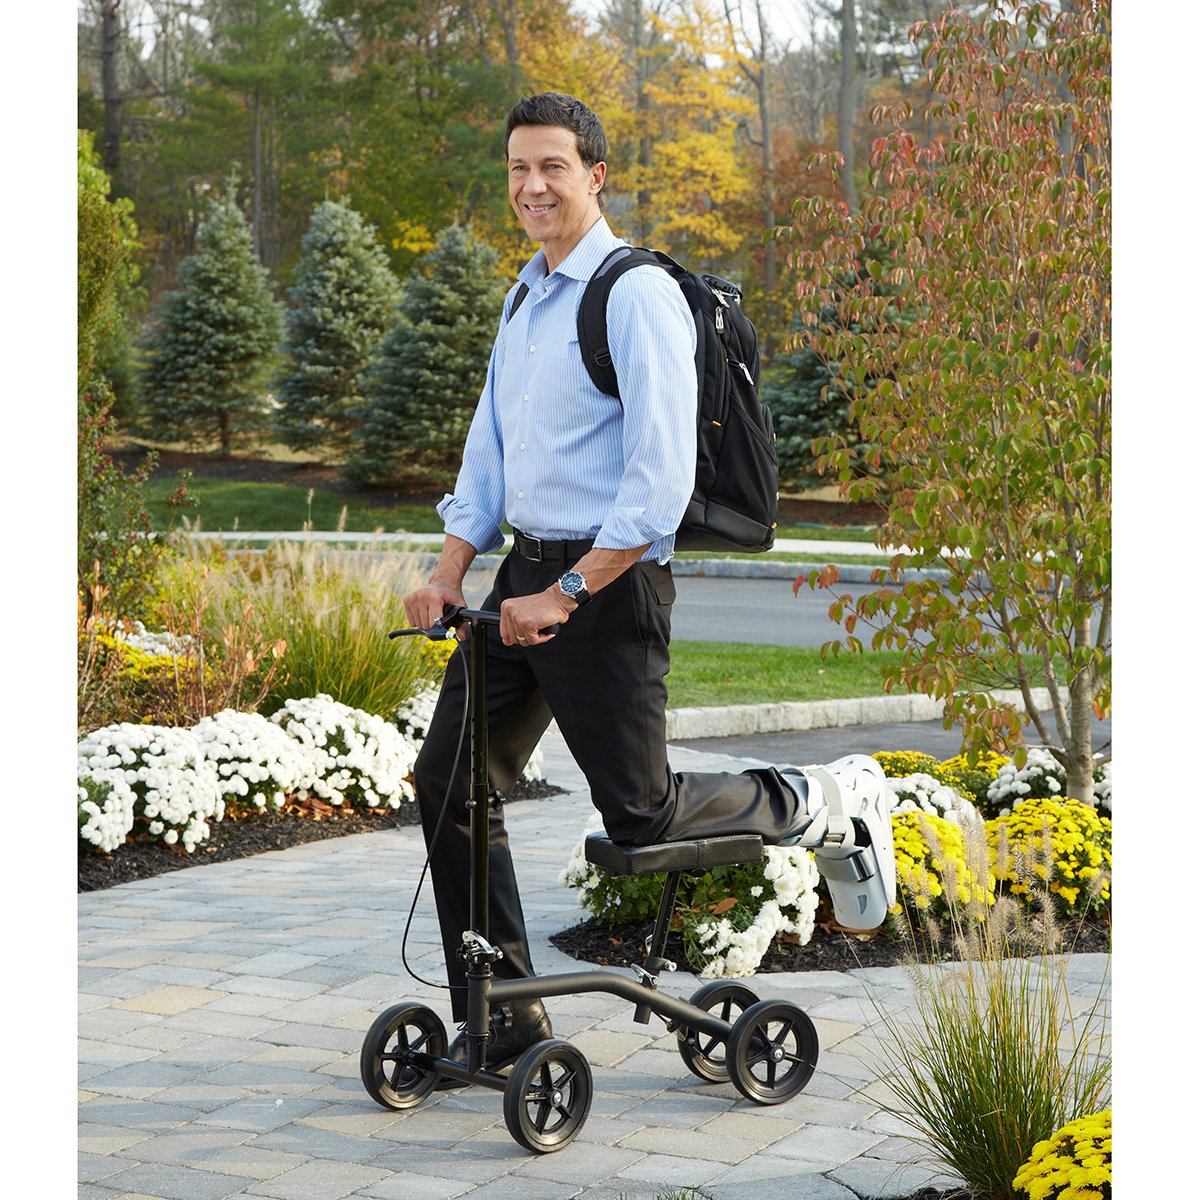 Carex Knee Scooter with Platform Pad, for Adults, Seniors, and Teens, Black, 250 lb Weight Capacity - image 2 of 3